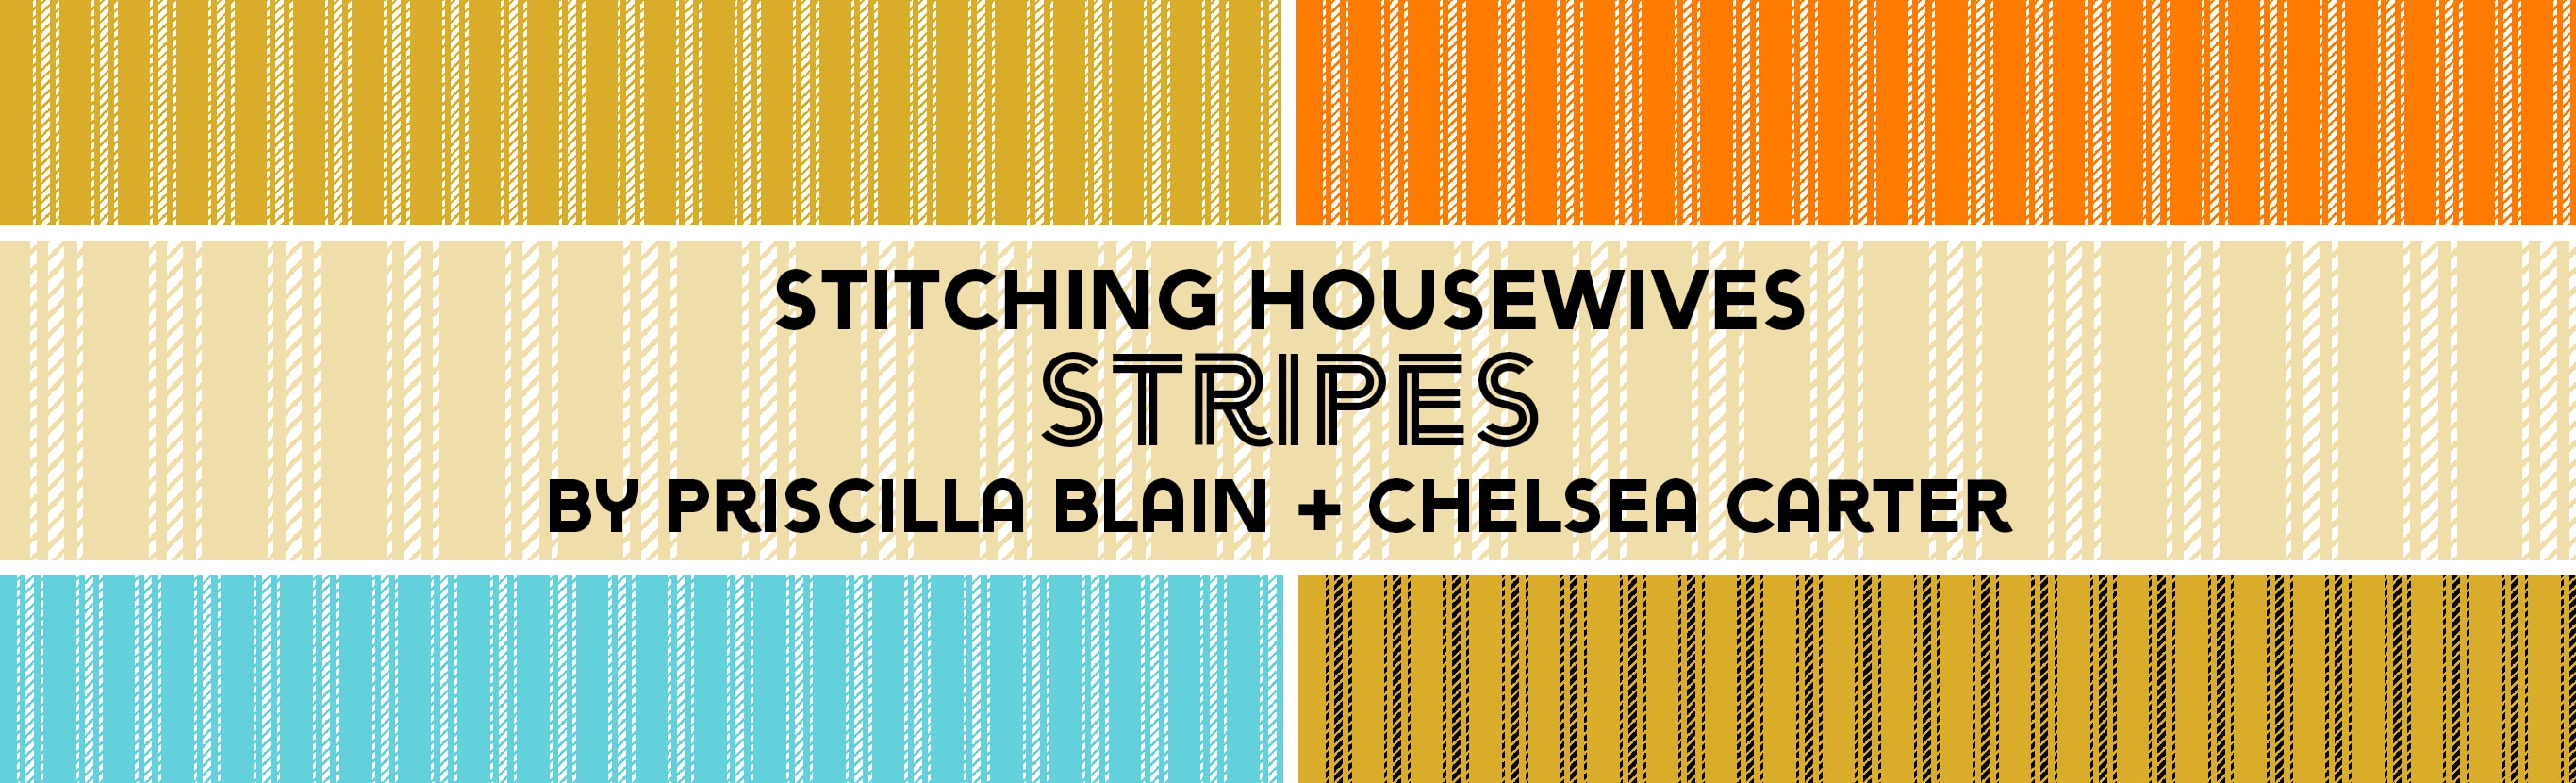 Stitching Housewives Stripes